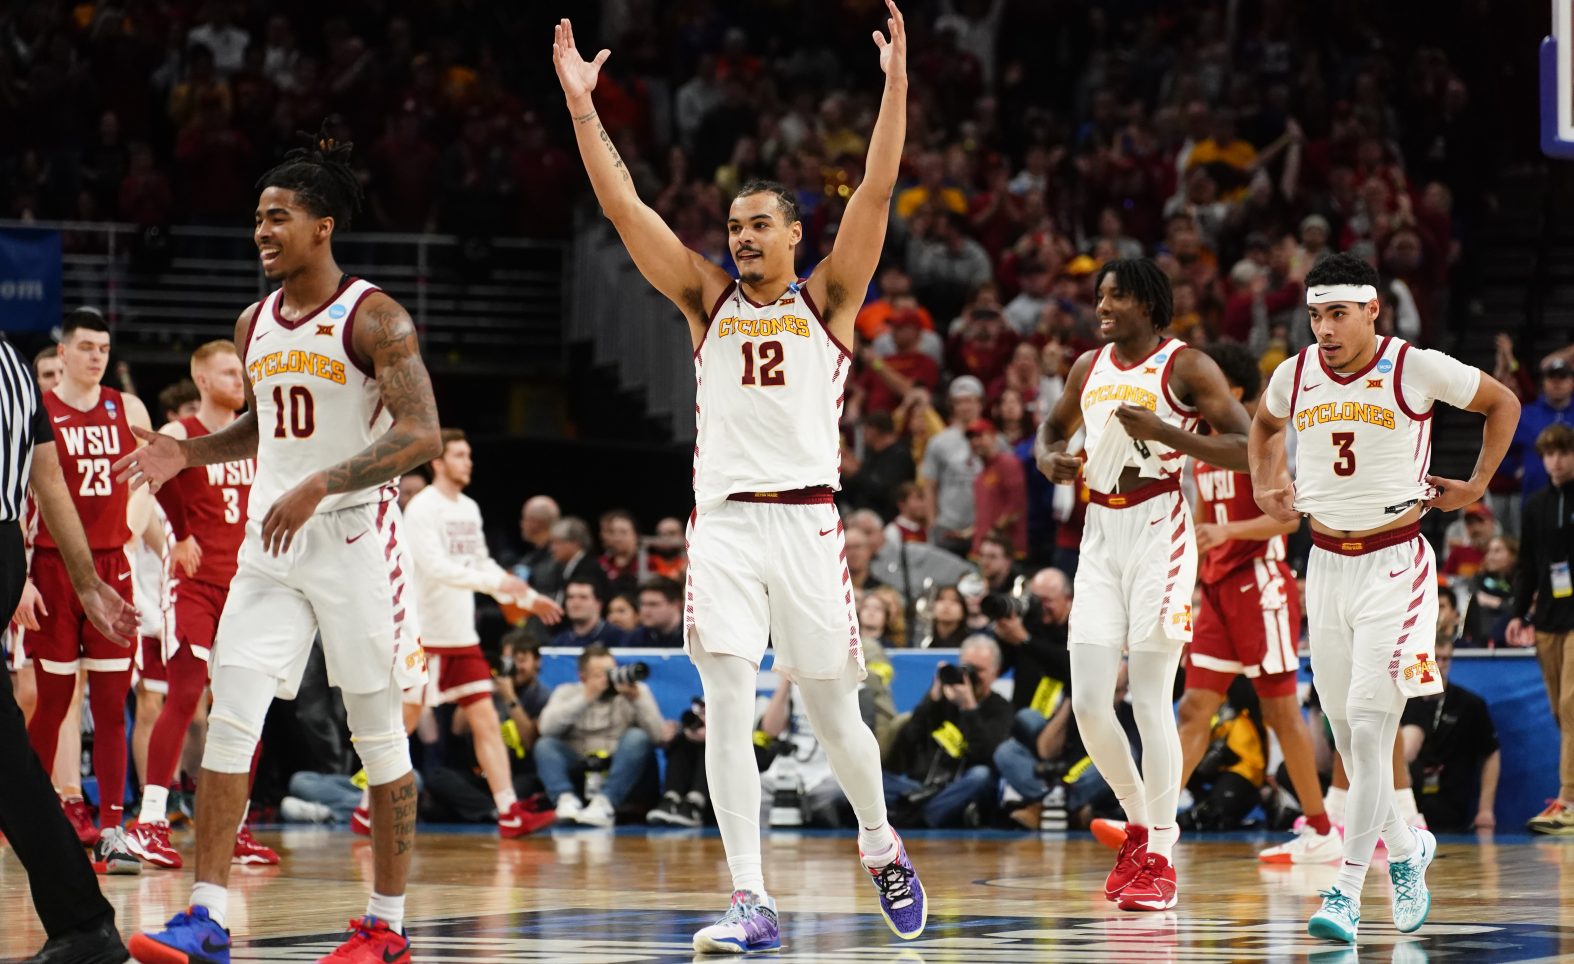 Two Guys: Cyclones to the Sweet 16, DeVries leaves for West Virginia